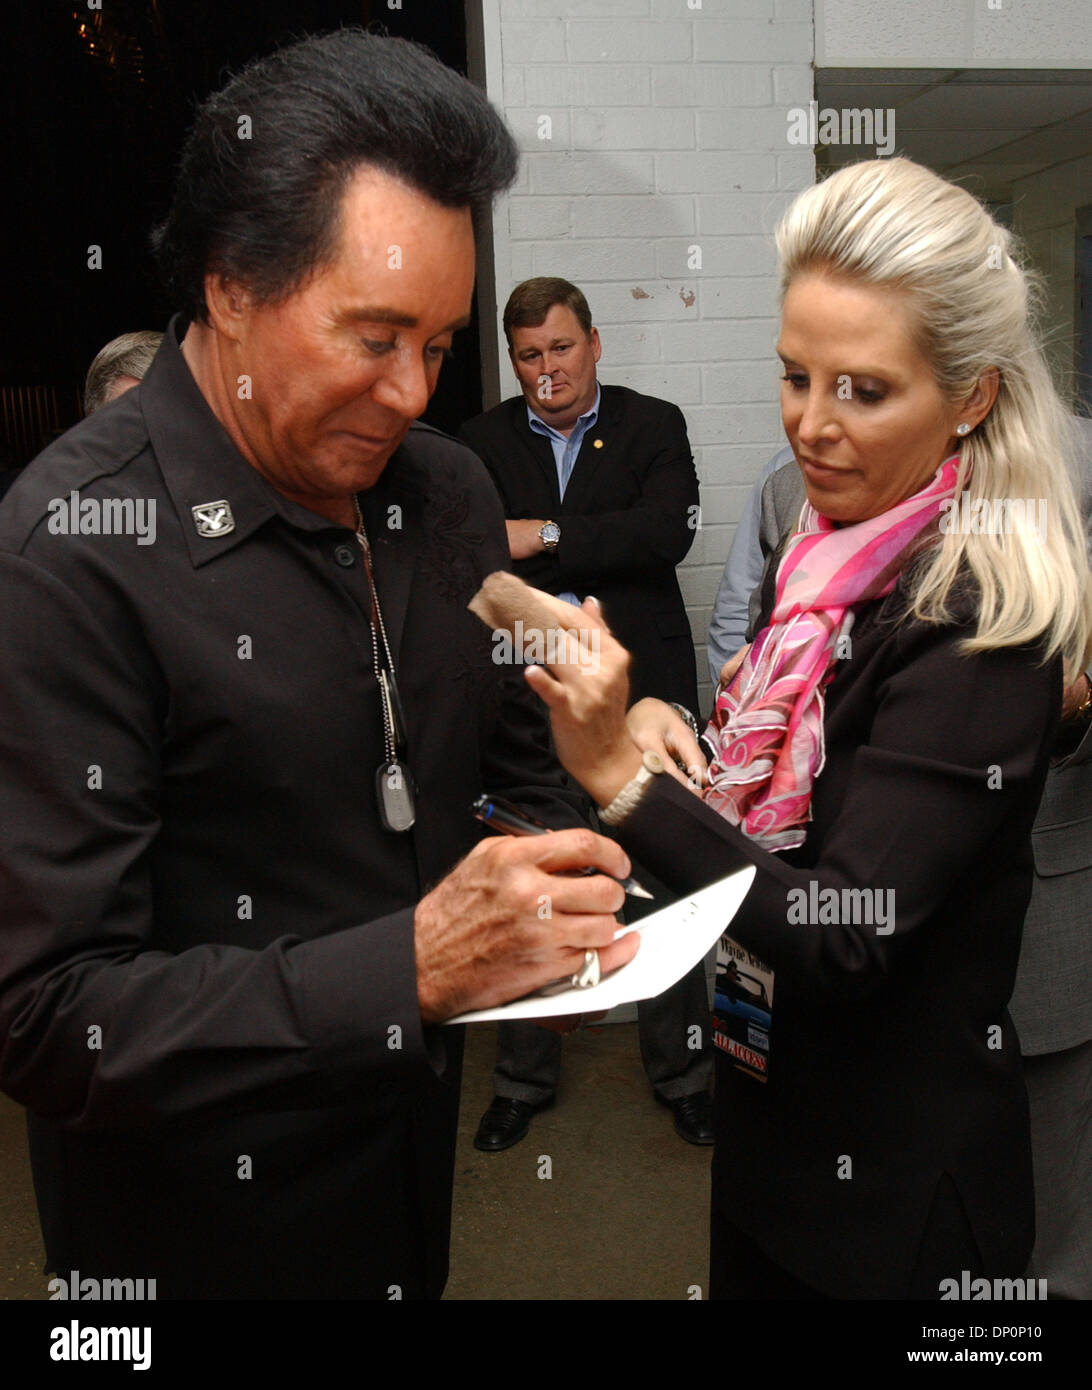 Mar 31, 2006; Fayetteville, NC, USA; Singer WAYNE NEWTON and wife KATHLEEN NEWTON looks on as Mr. Newton signs an autograph  after Mr. Newton performed  at  the Crown Theatre located in Fayetteville, NC.  Earlier in the day Mr. Newton visited the local Veterans Hospital patients and spoke with troops at Fort Bragg located in North Carolina. Mandatory Credit: Photo by Jason Moore/ZU Stock Photo